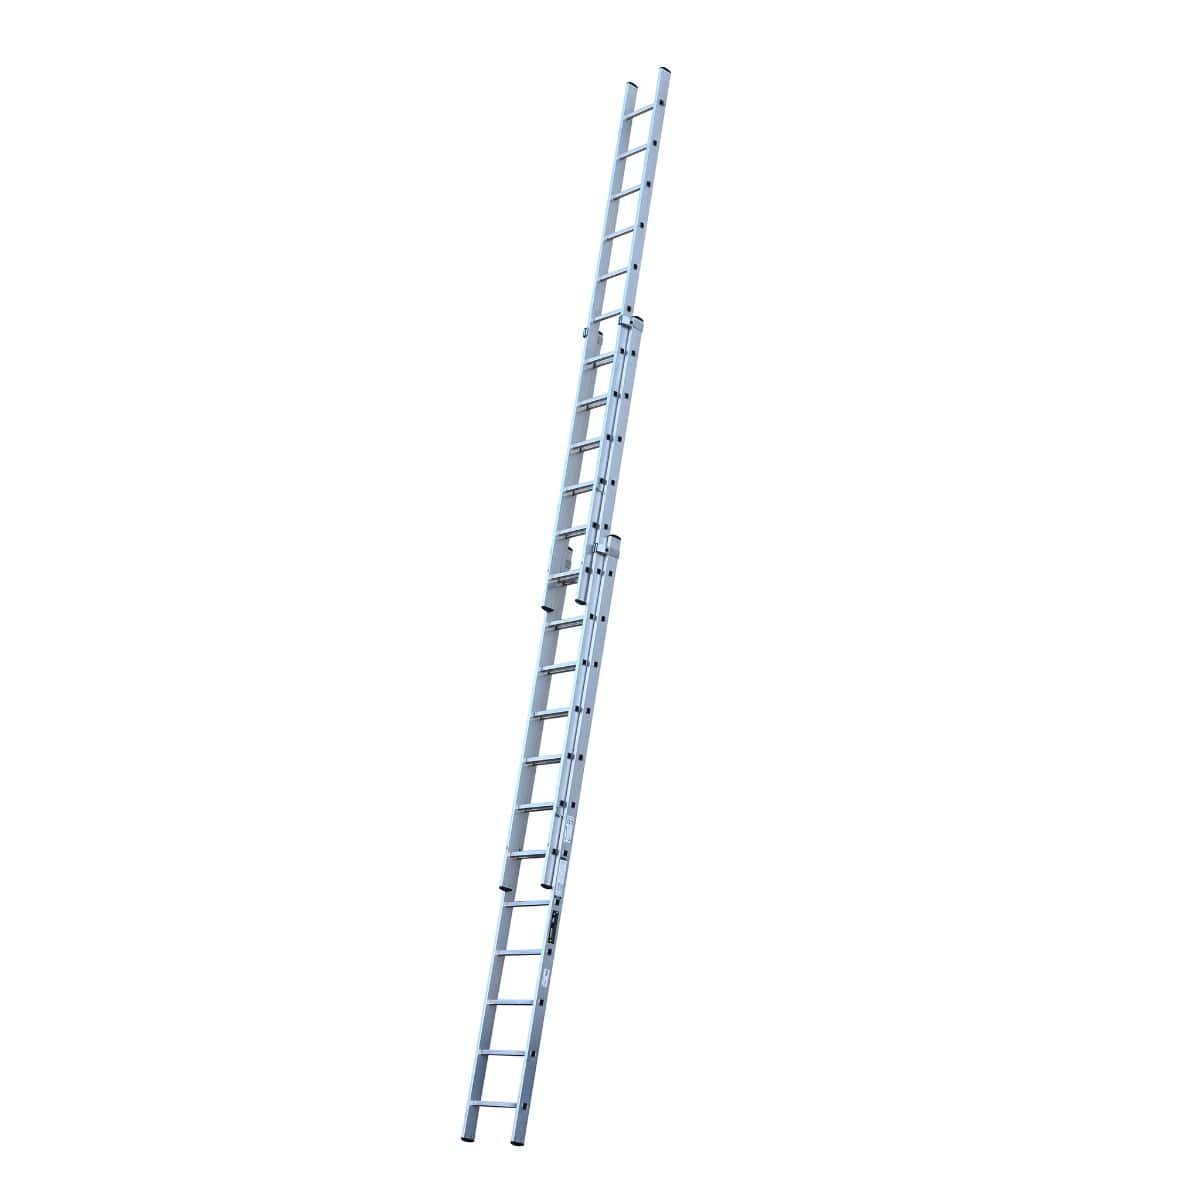 Youngman 3 Section Trade 200 Ladder 3.66-9.17m